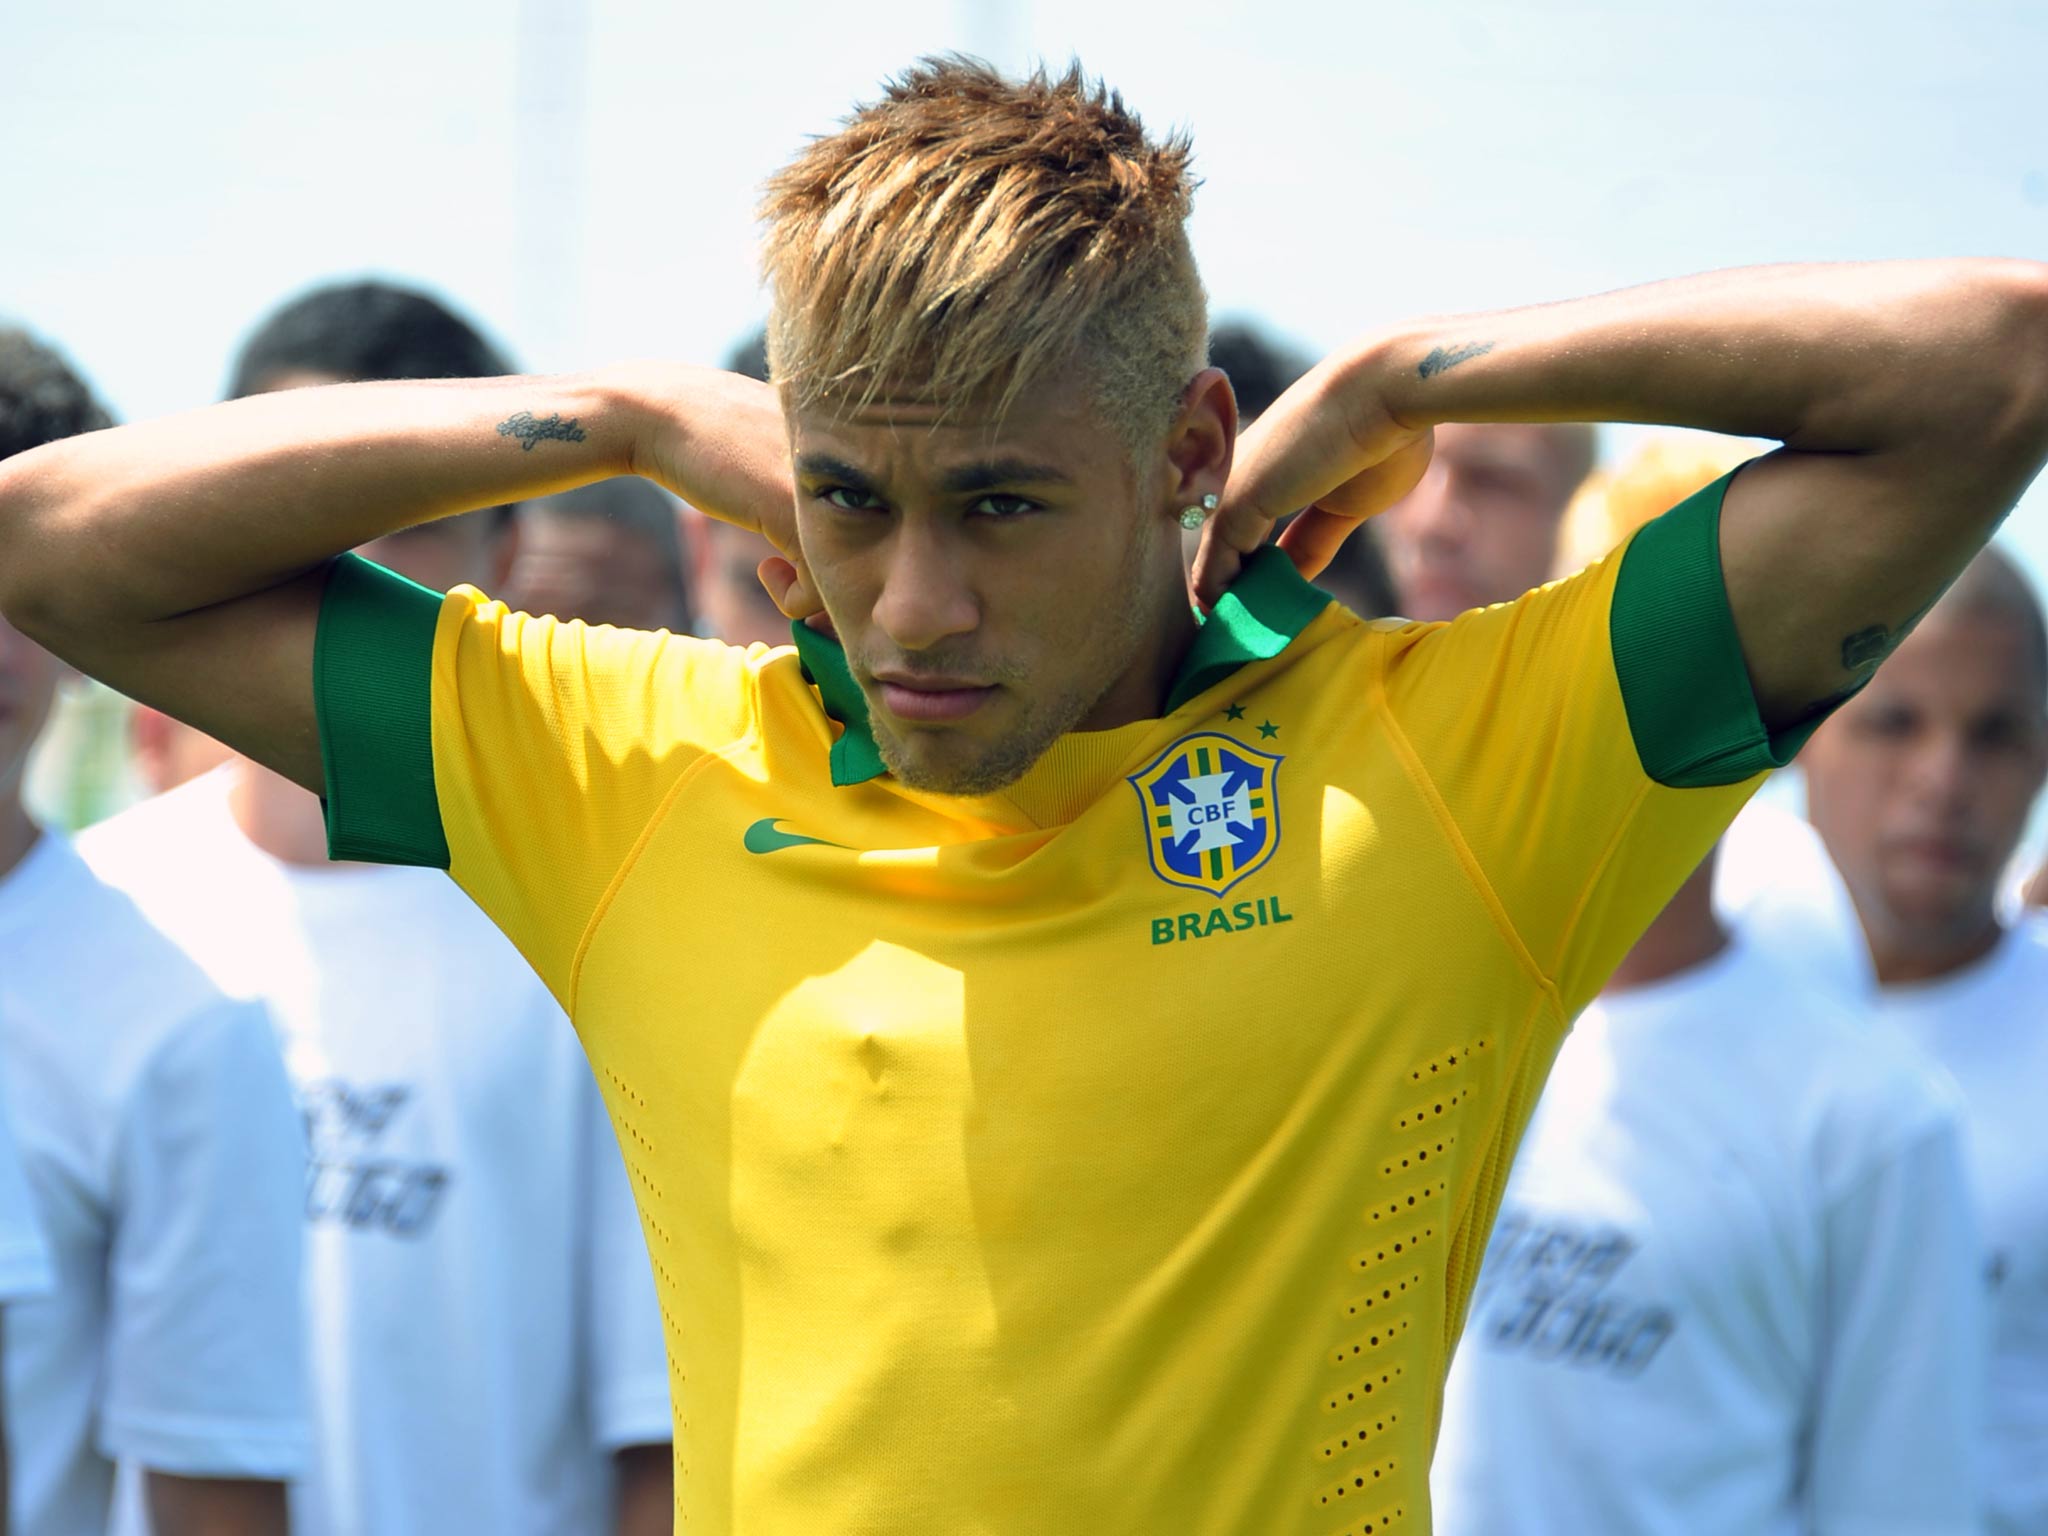 Neymar Has scored 17 goals in just 27 appearances for his country, and has remained in Brazil with Santos despite interest from elsewhere. The 21-year-old forward will no doubt be Brazil's main attacking threat.